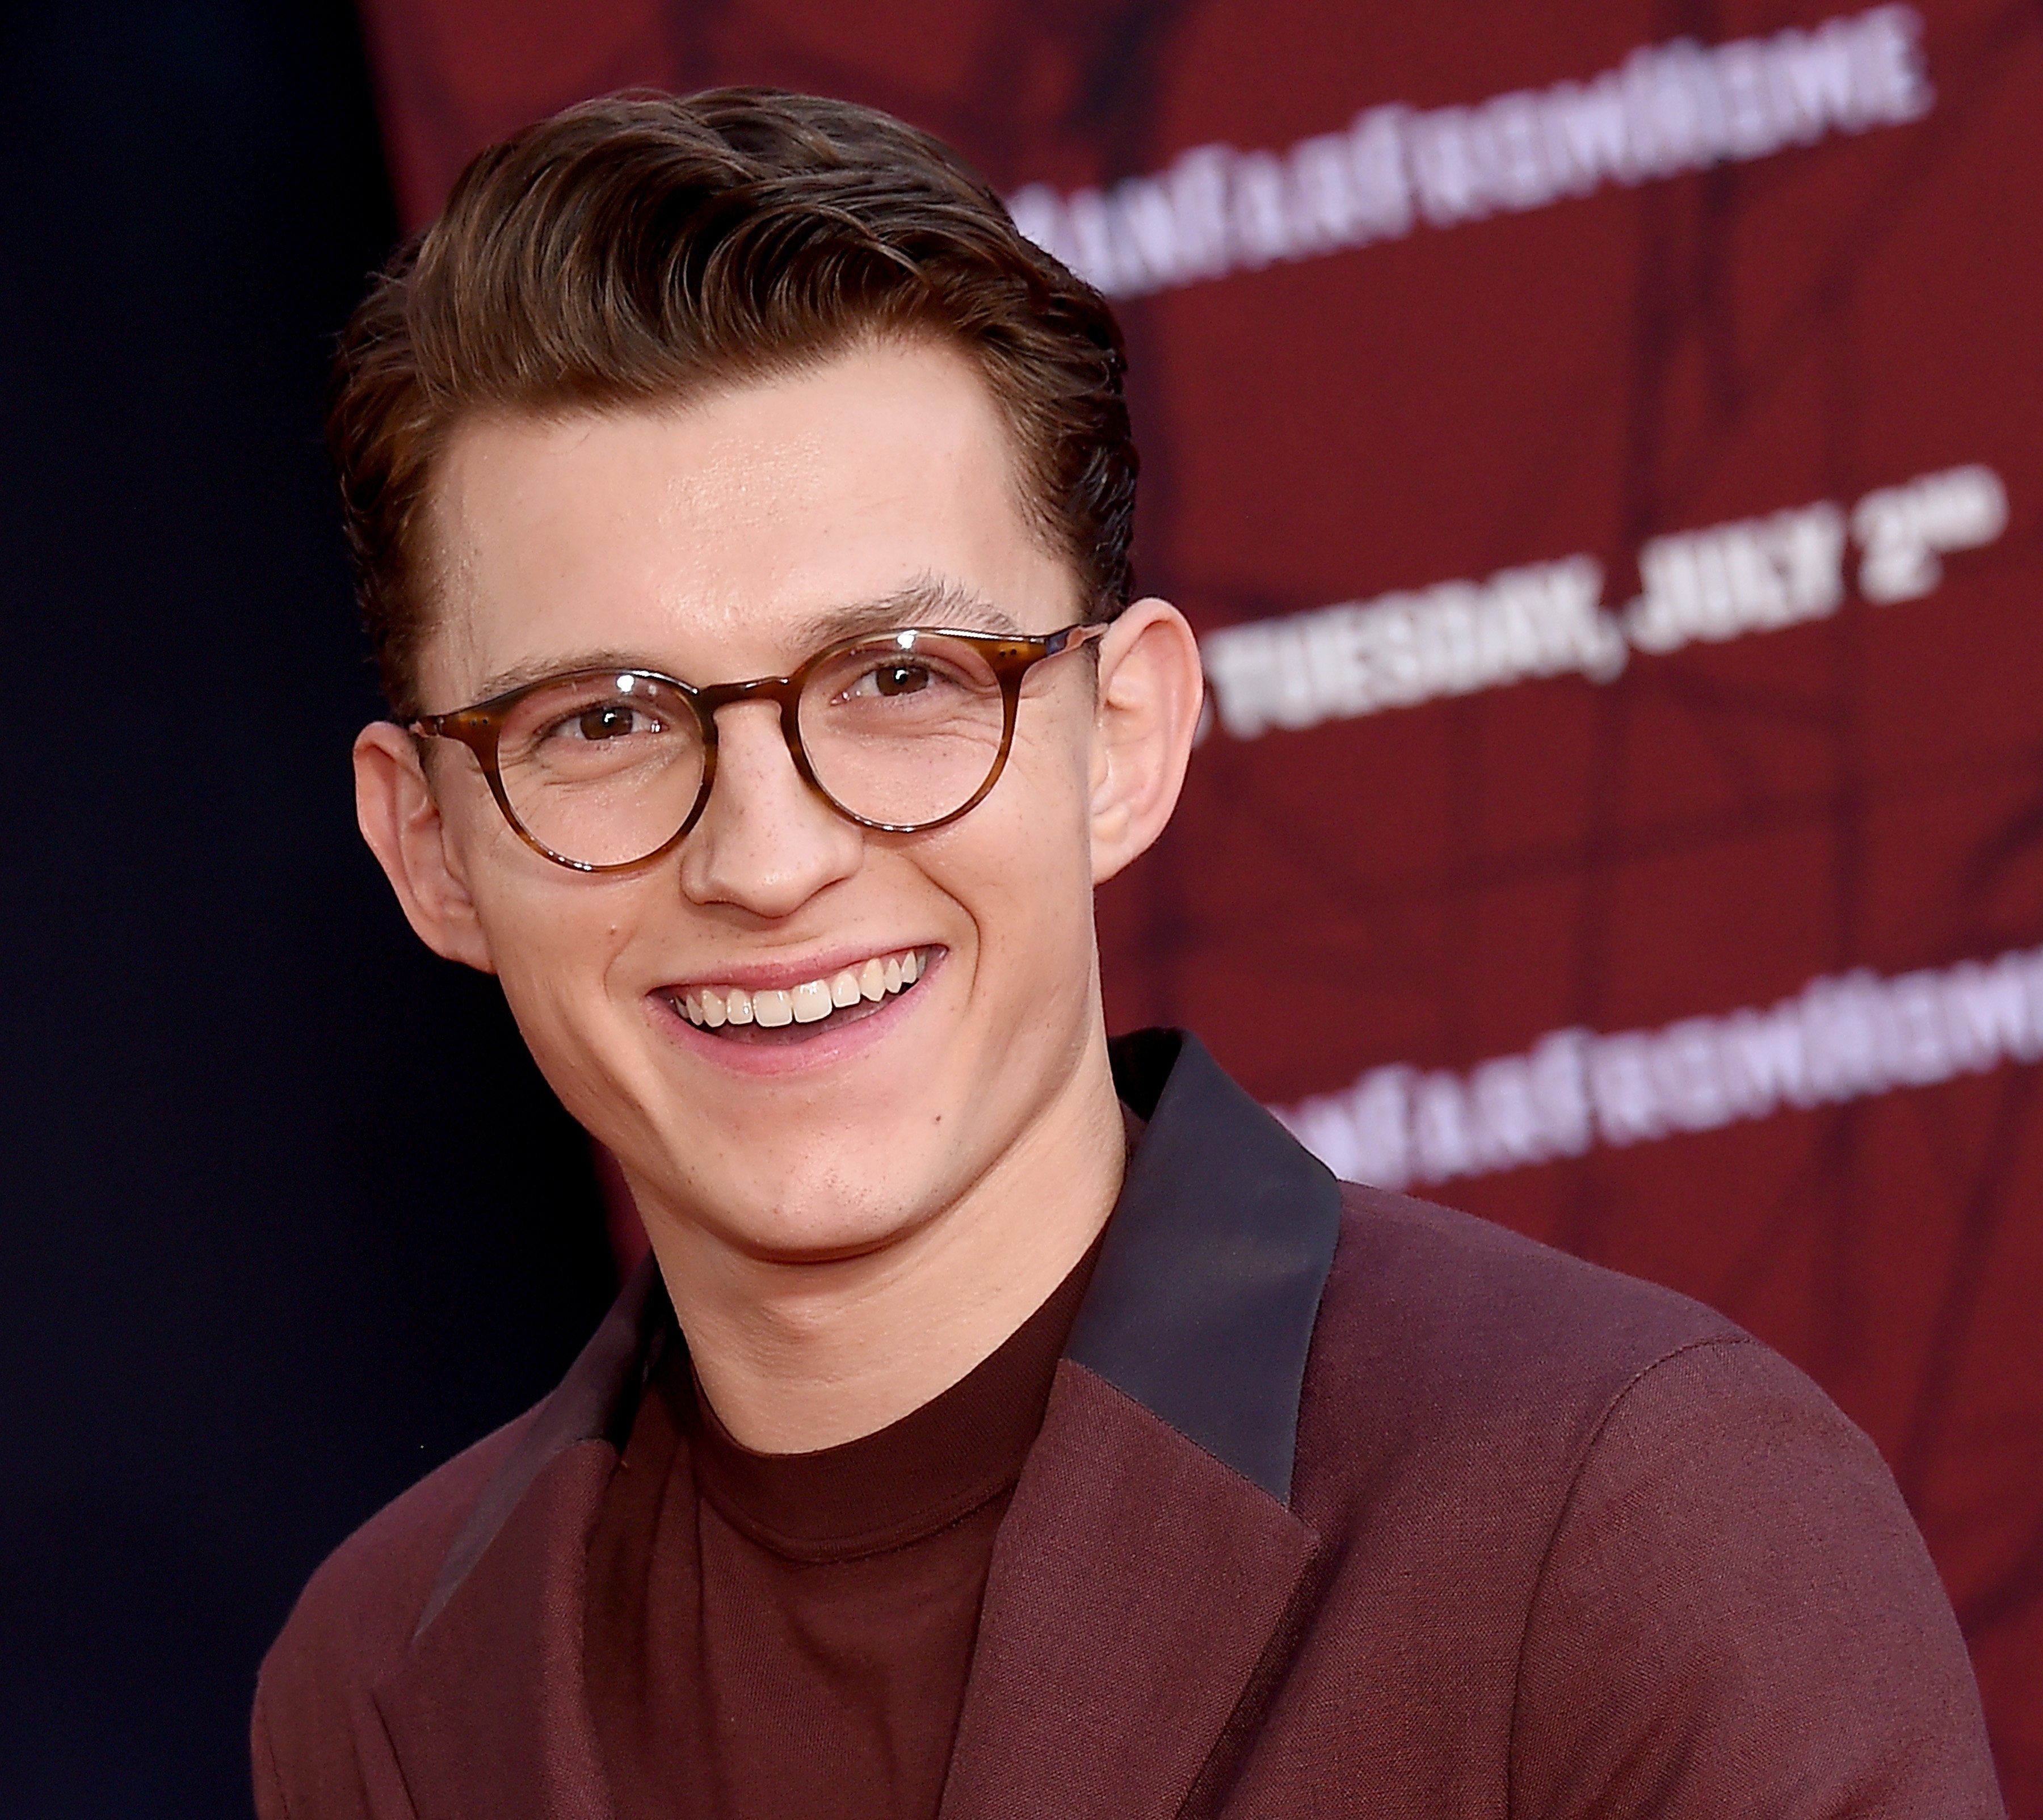 Tom Holland at the premiere of "Spider-Man Far From Home" in 2019 in Hollywood, California. | Source: Getty Images